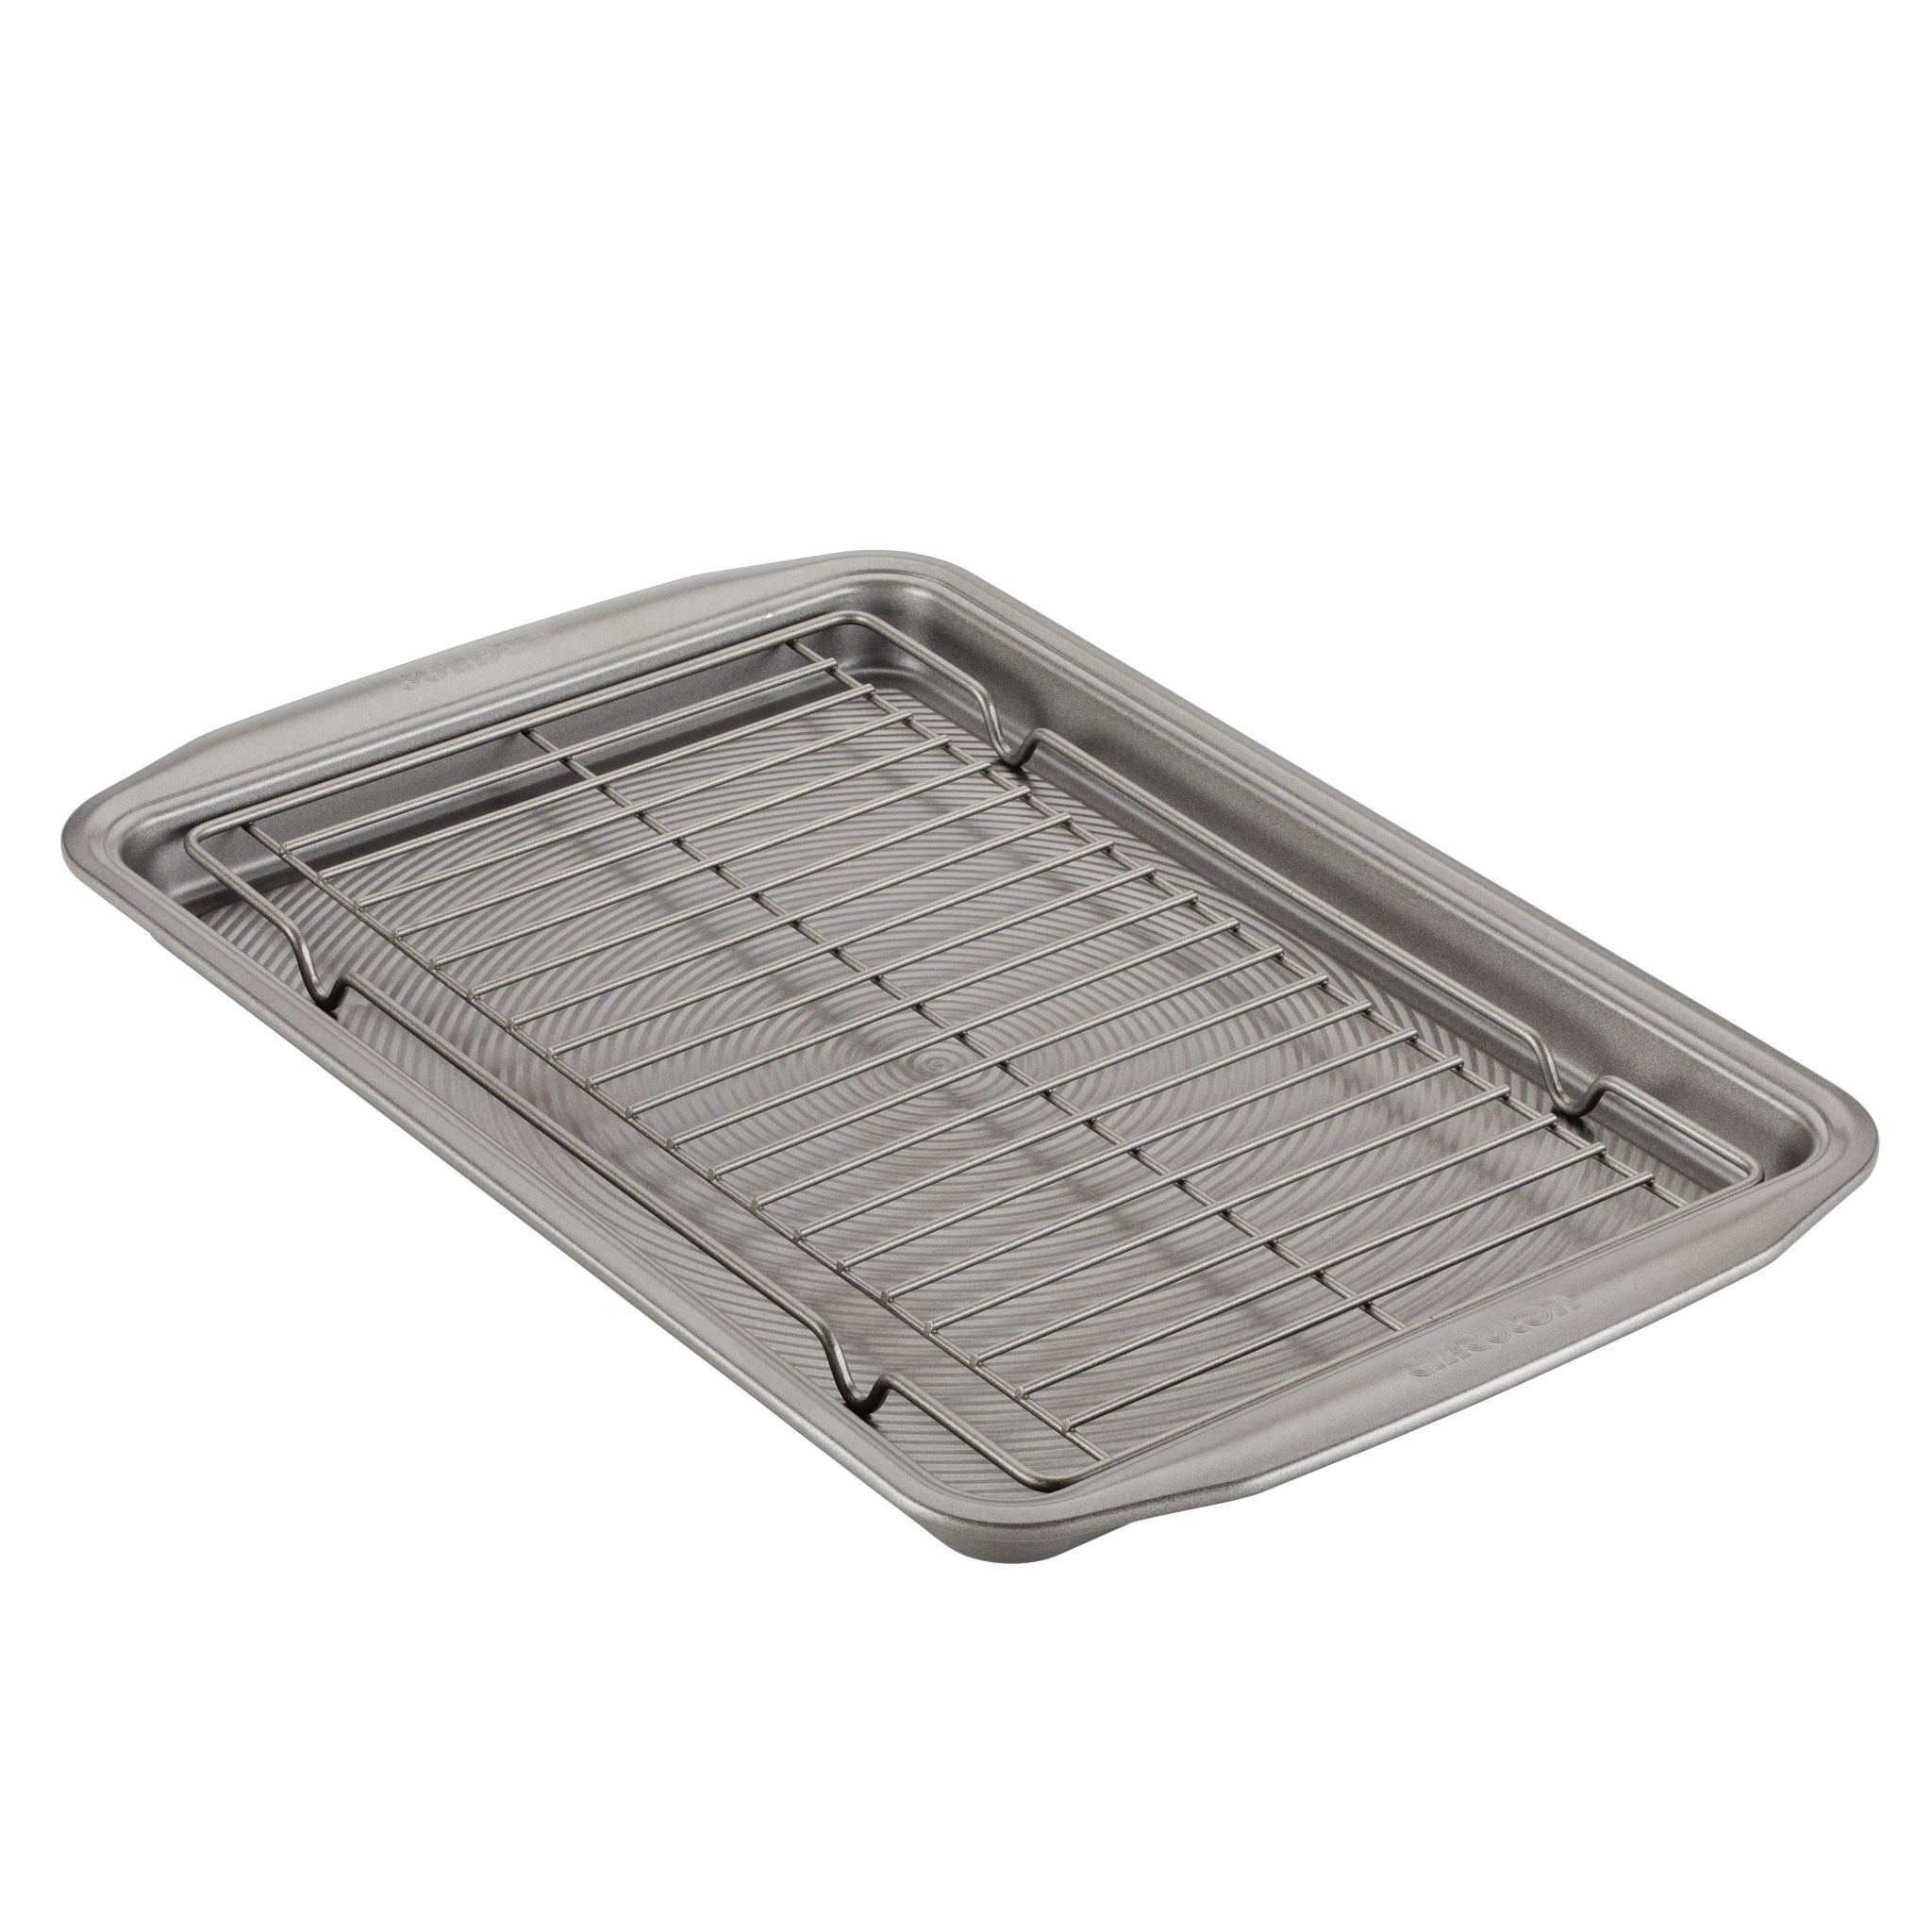 The Kitchen Tools We Use Daily: Rimmed Baking Sheets and Wire Racks 